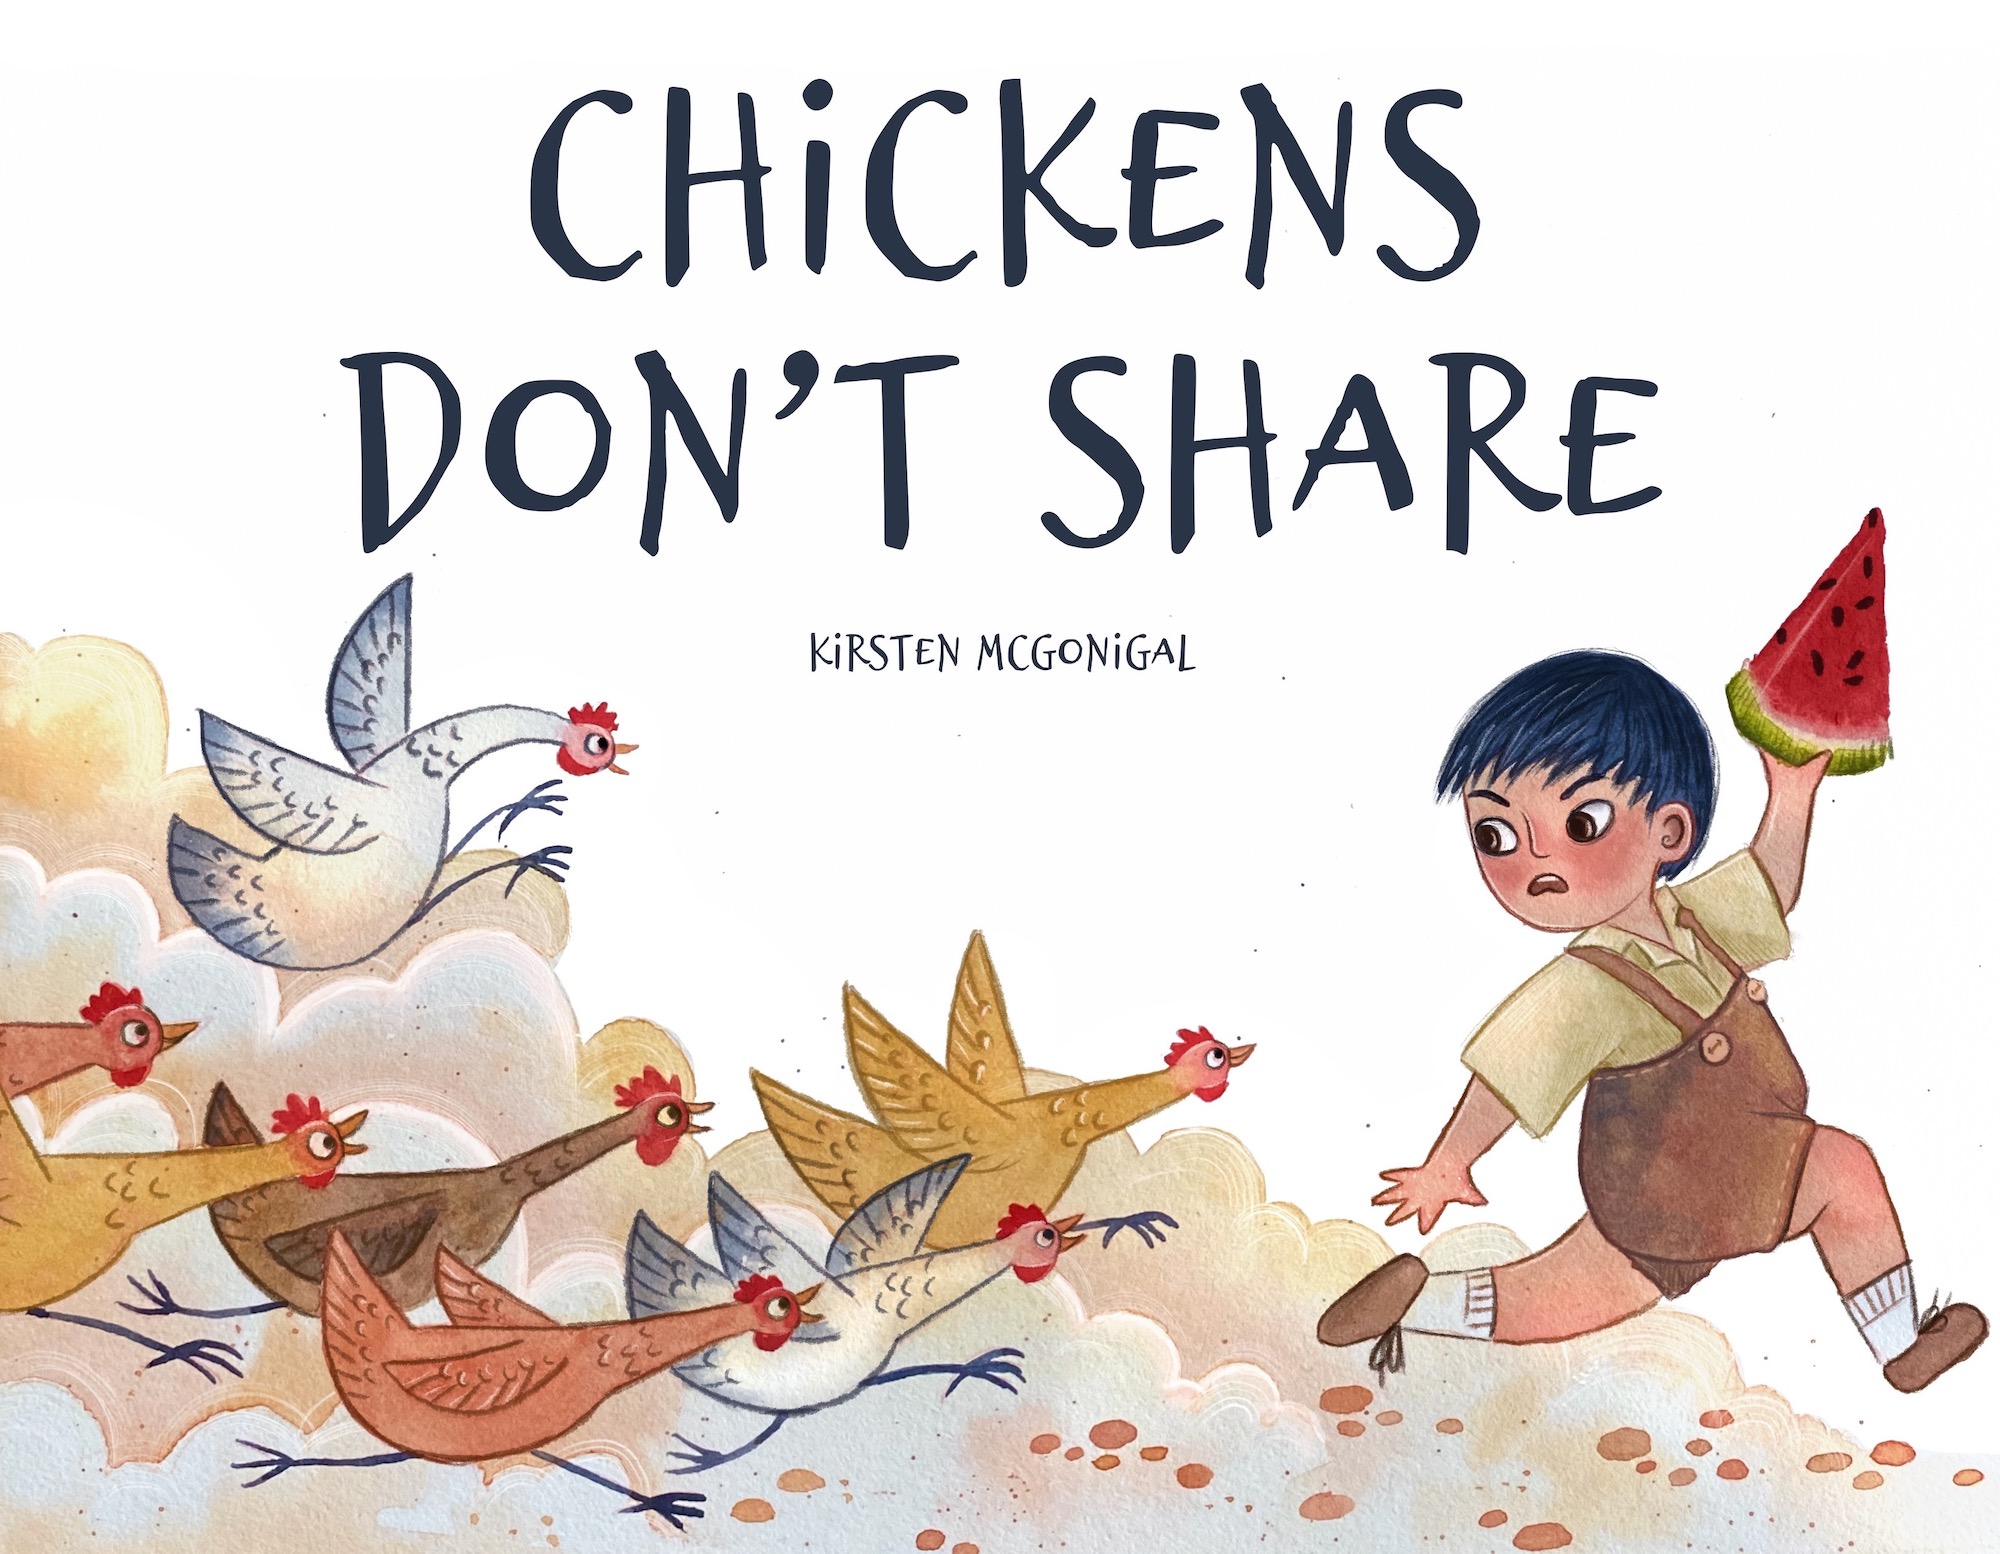 Book Cover titled Chickens Don't Share, picturing a little boy with a slice of watermelon running away from a flock of chickens. There is dust being kicked up from the chicken's and boy's feet.